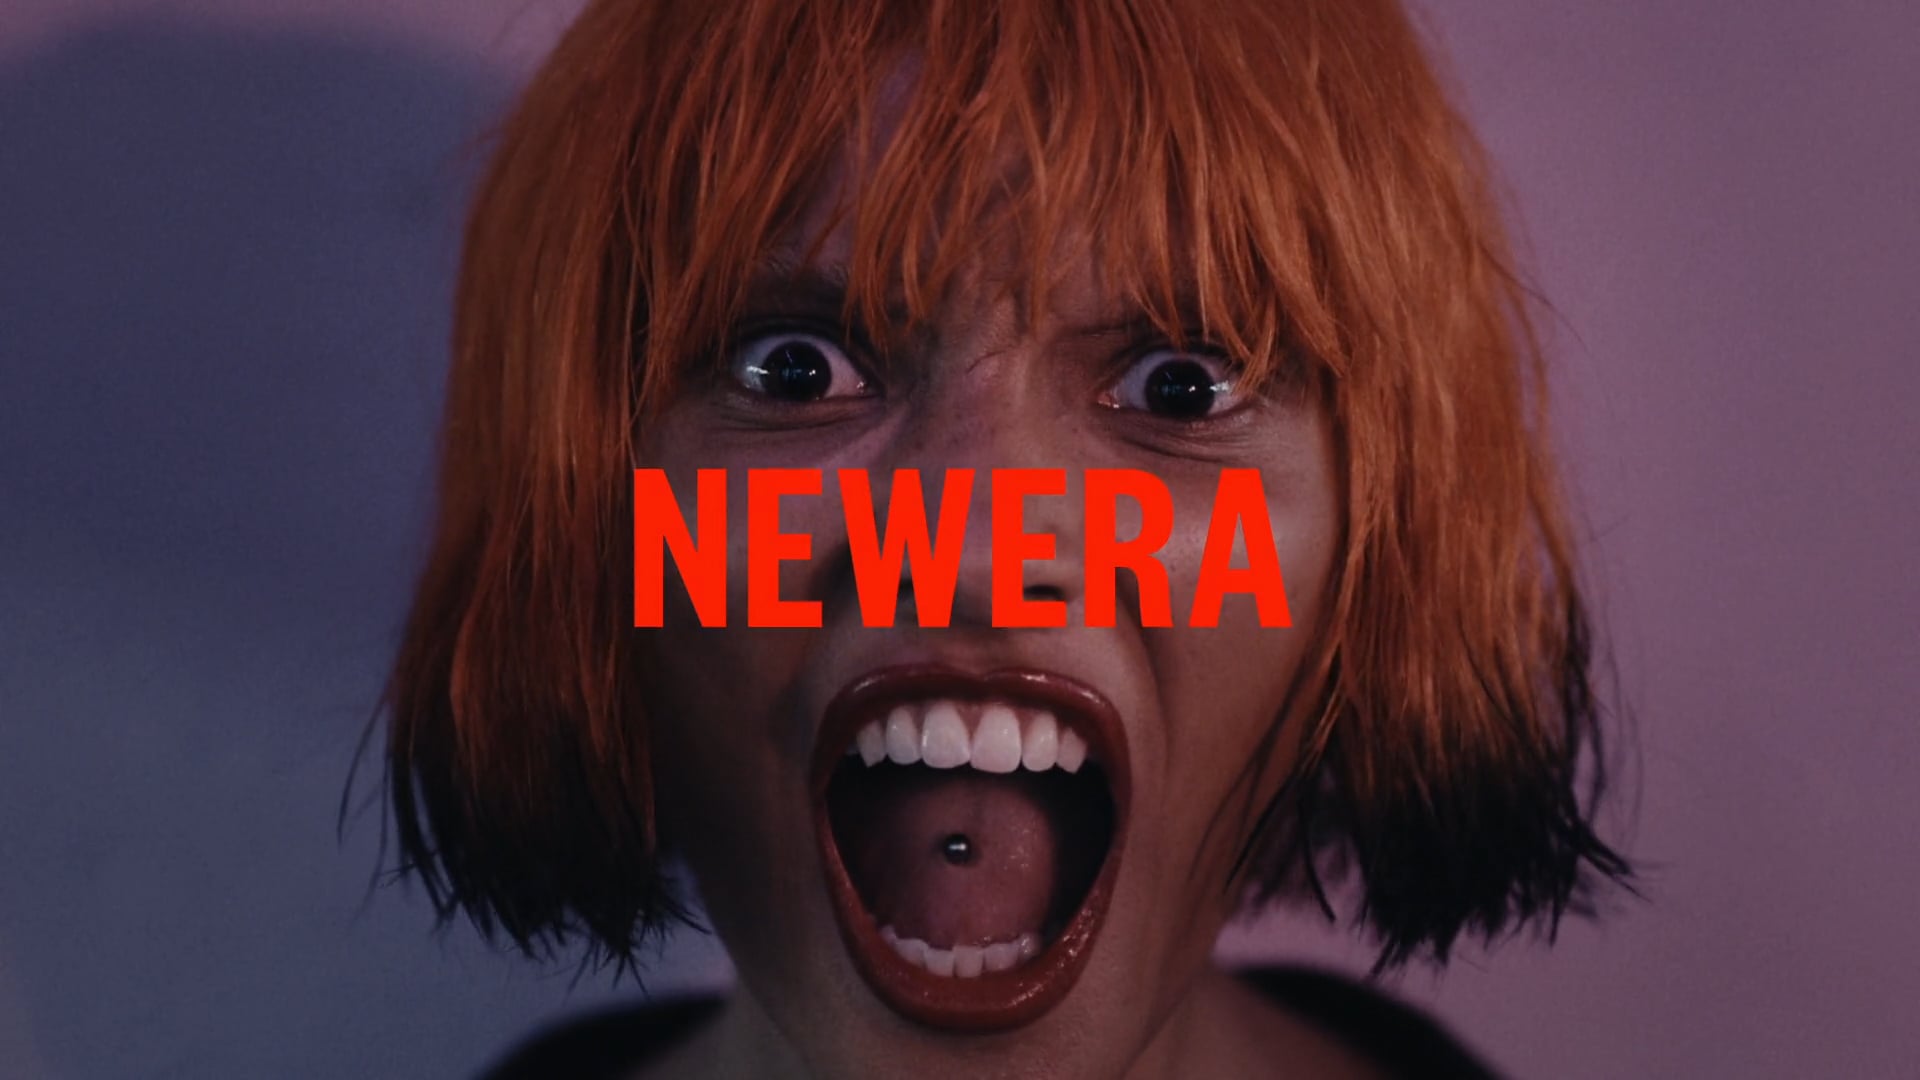 NEWERA "the messenger" written & directed by Thibault-Théodore